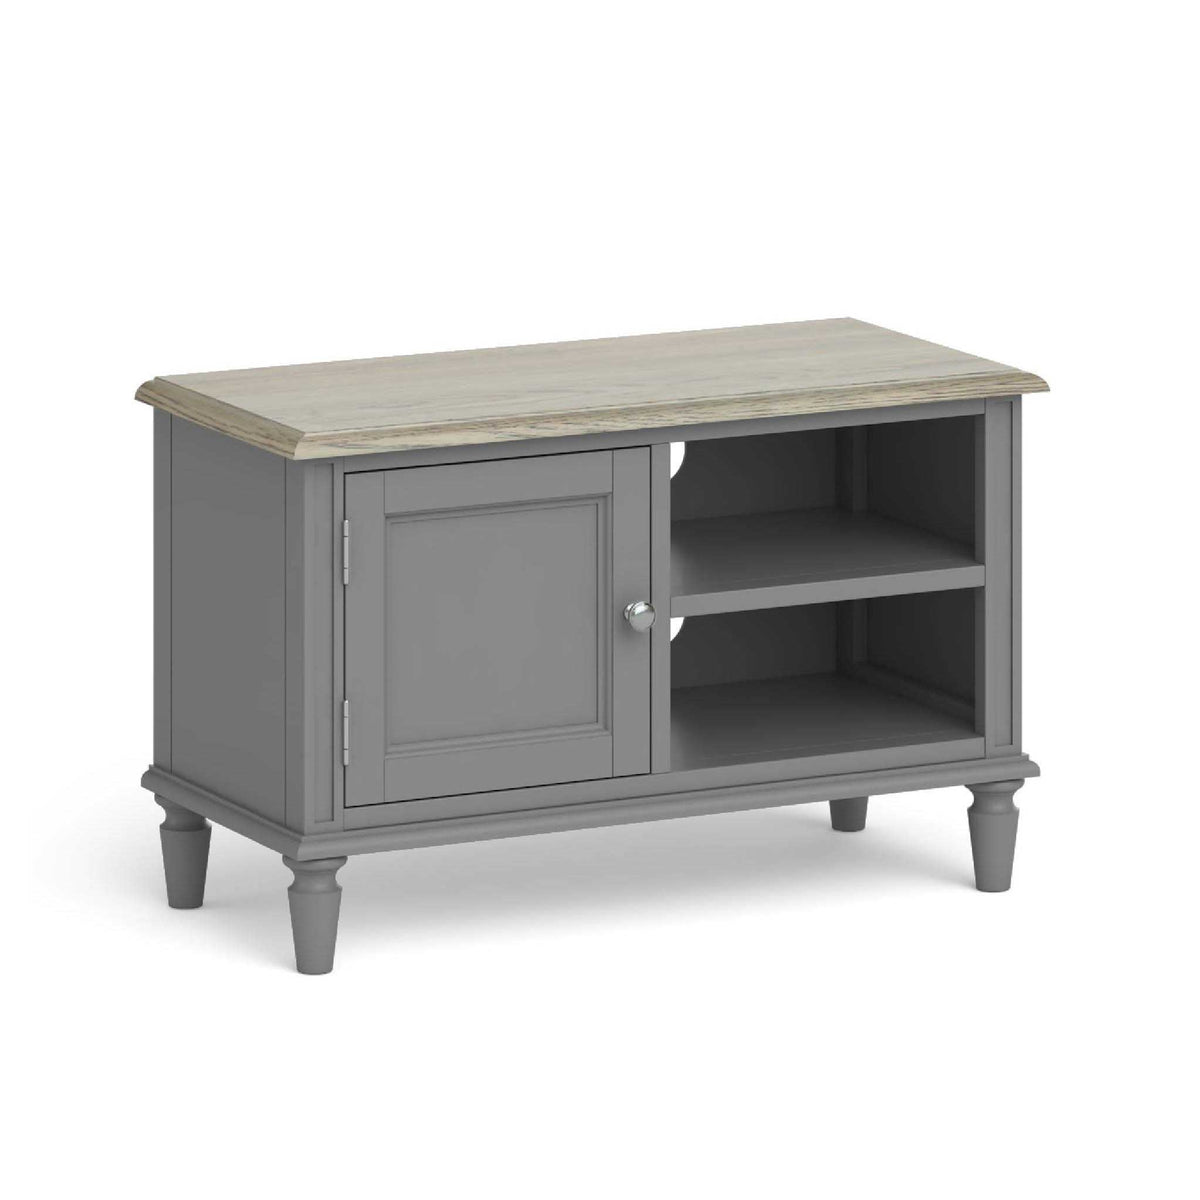 The Mulsanne Grey French Style Small TV Unit with Cupboard from Roseland Furniture